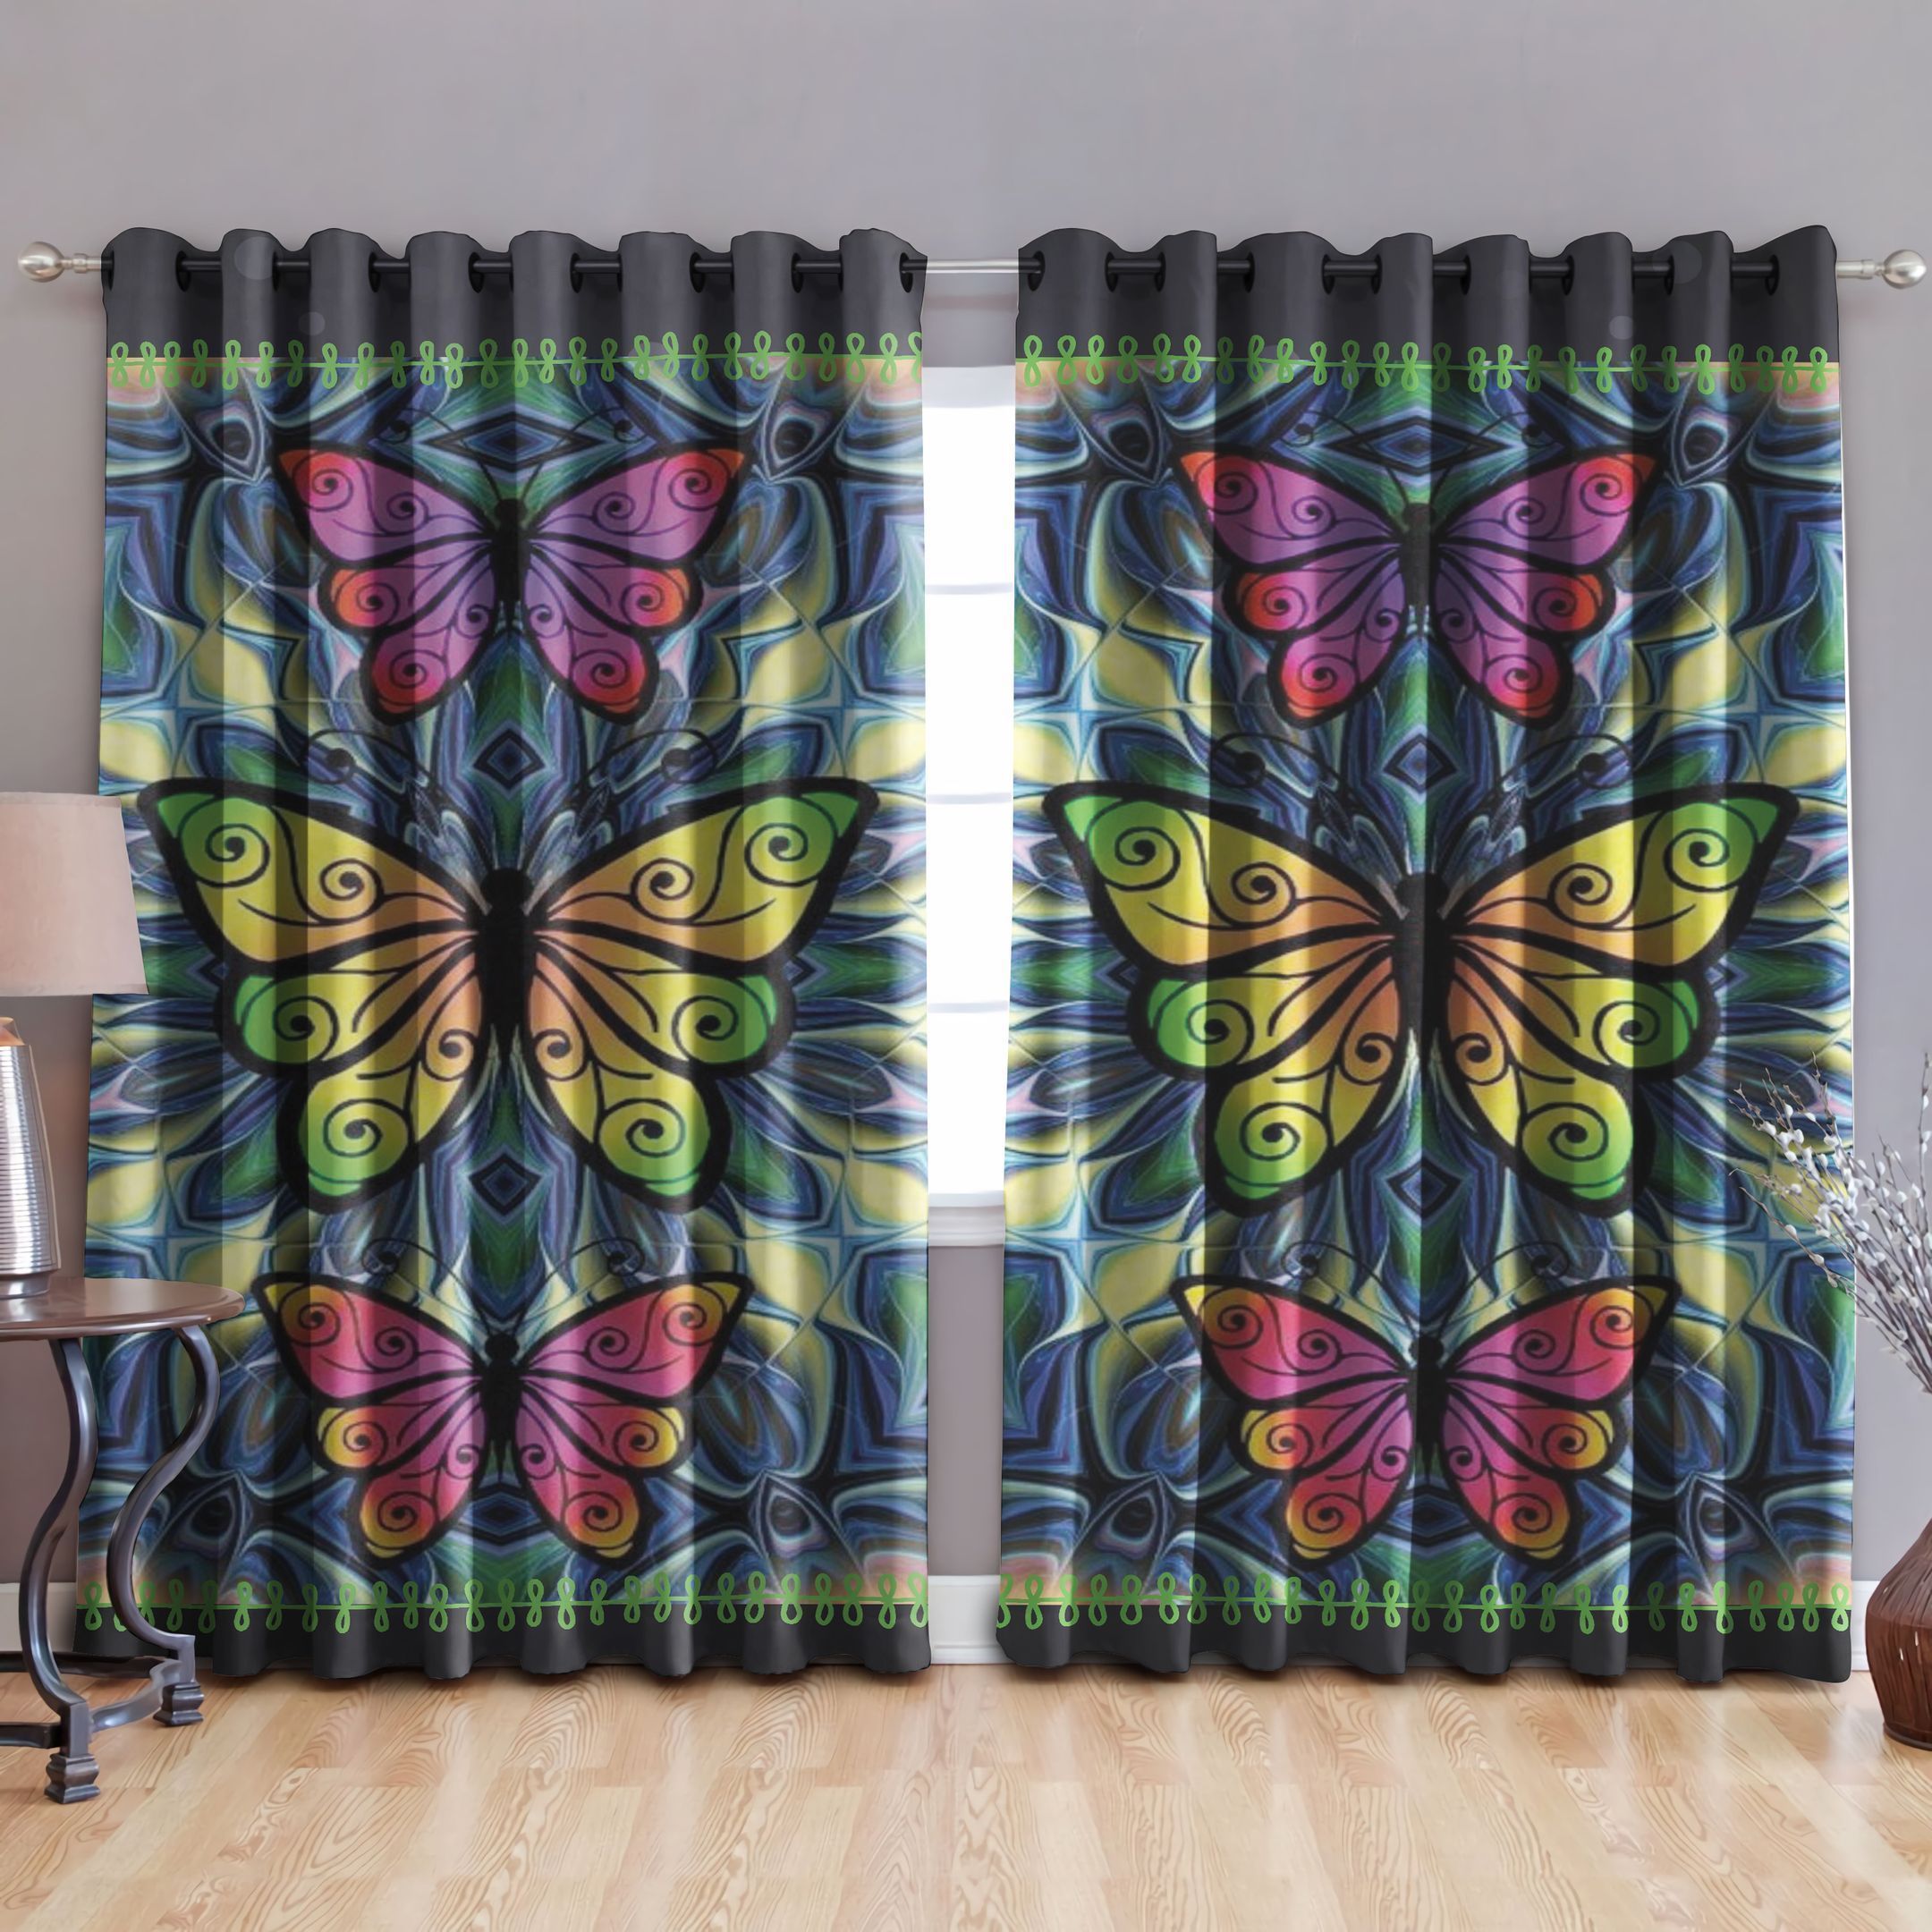 Be Free Butterfly Printed Window Curtain Home Decor